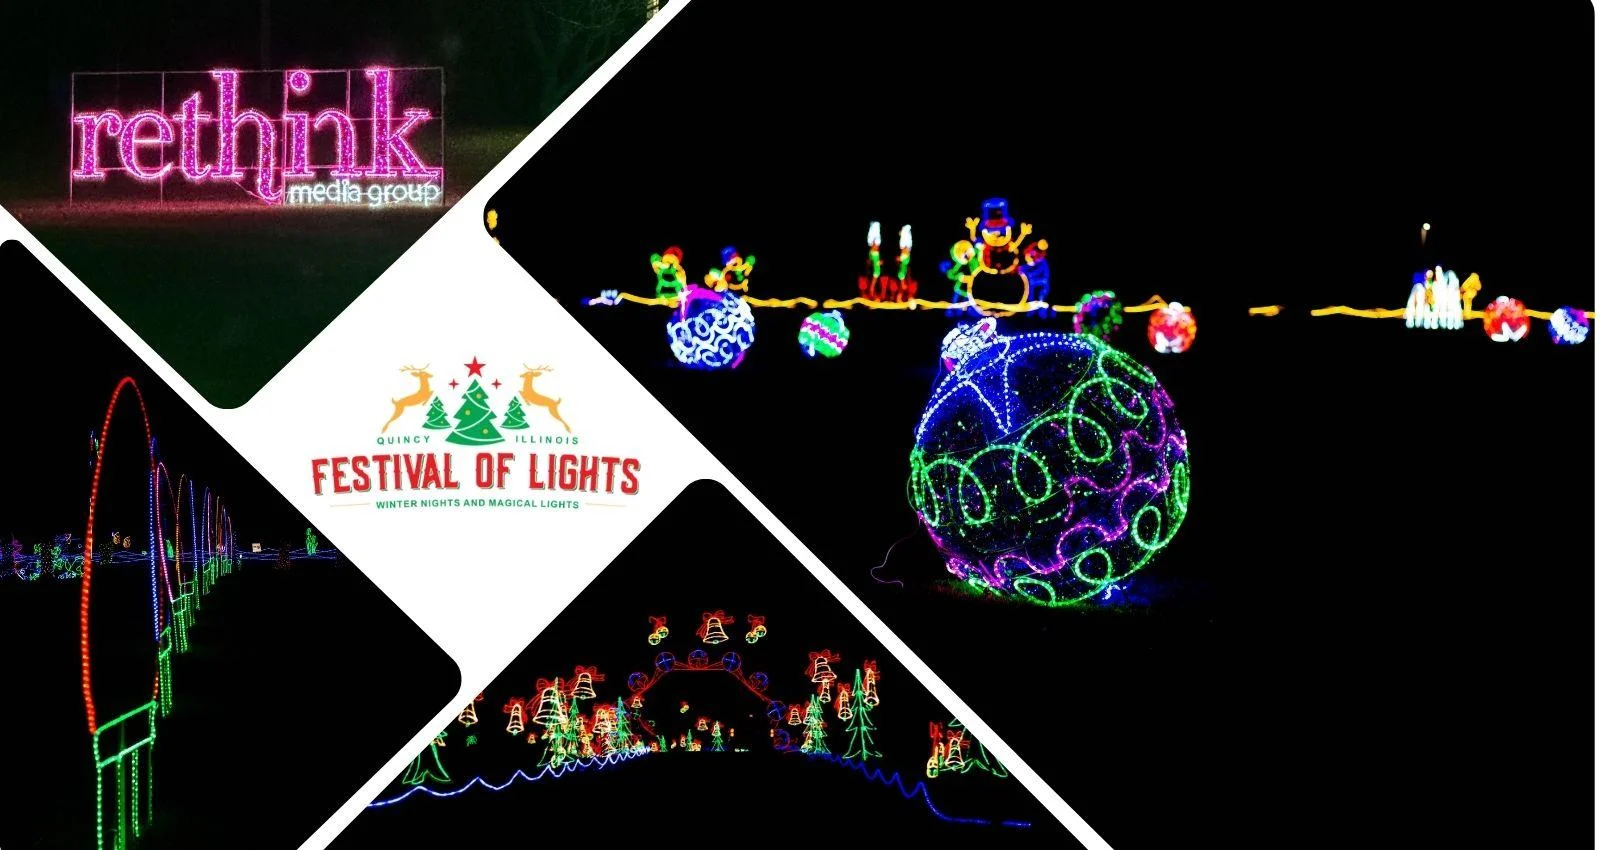 Rethink Media - Festival of Lights Case Study - Quincy, IL